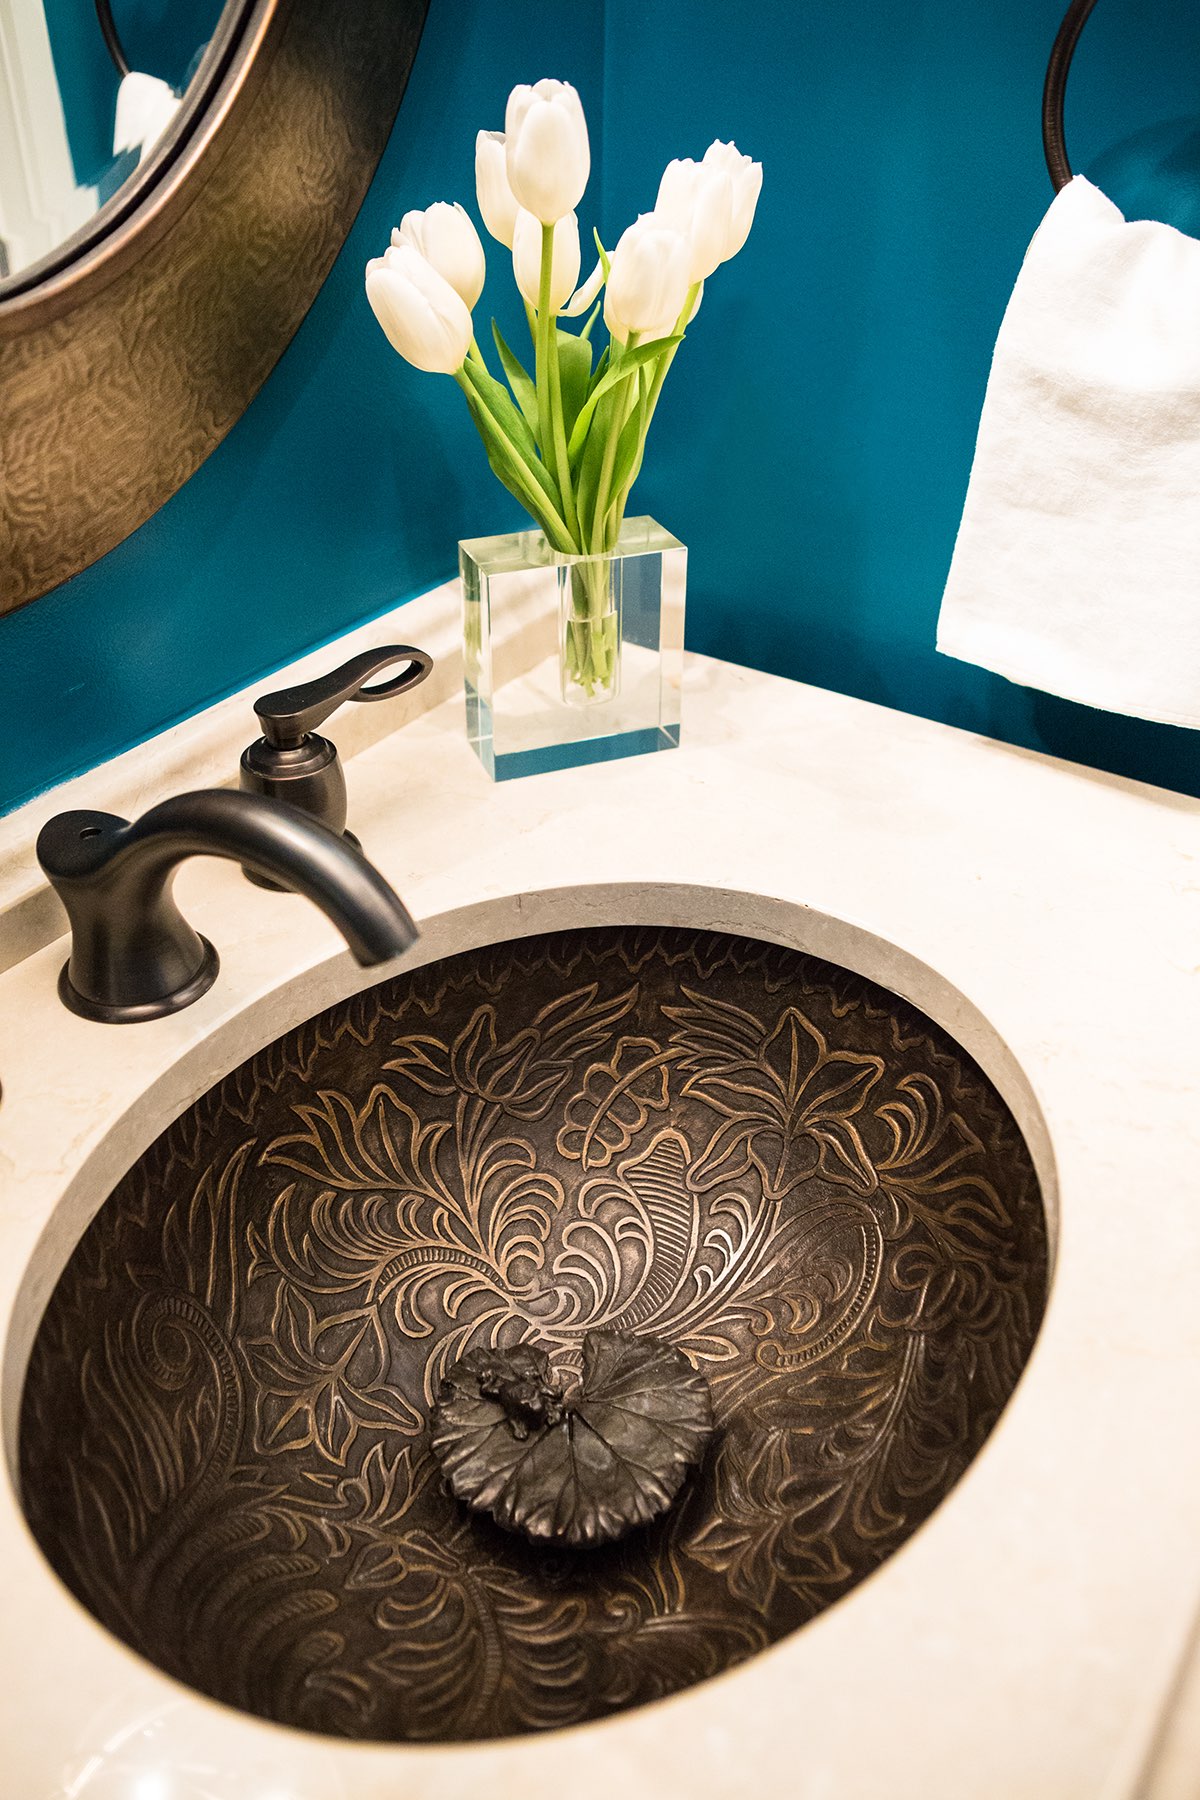 Bronze powder-room sink with lily design and lily pad sink stopper with unique tiny frog sculpture